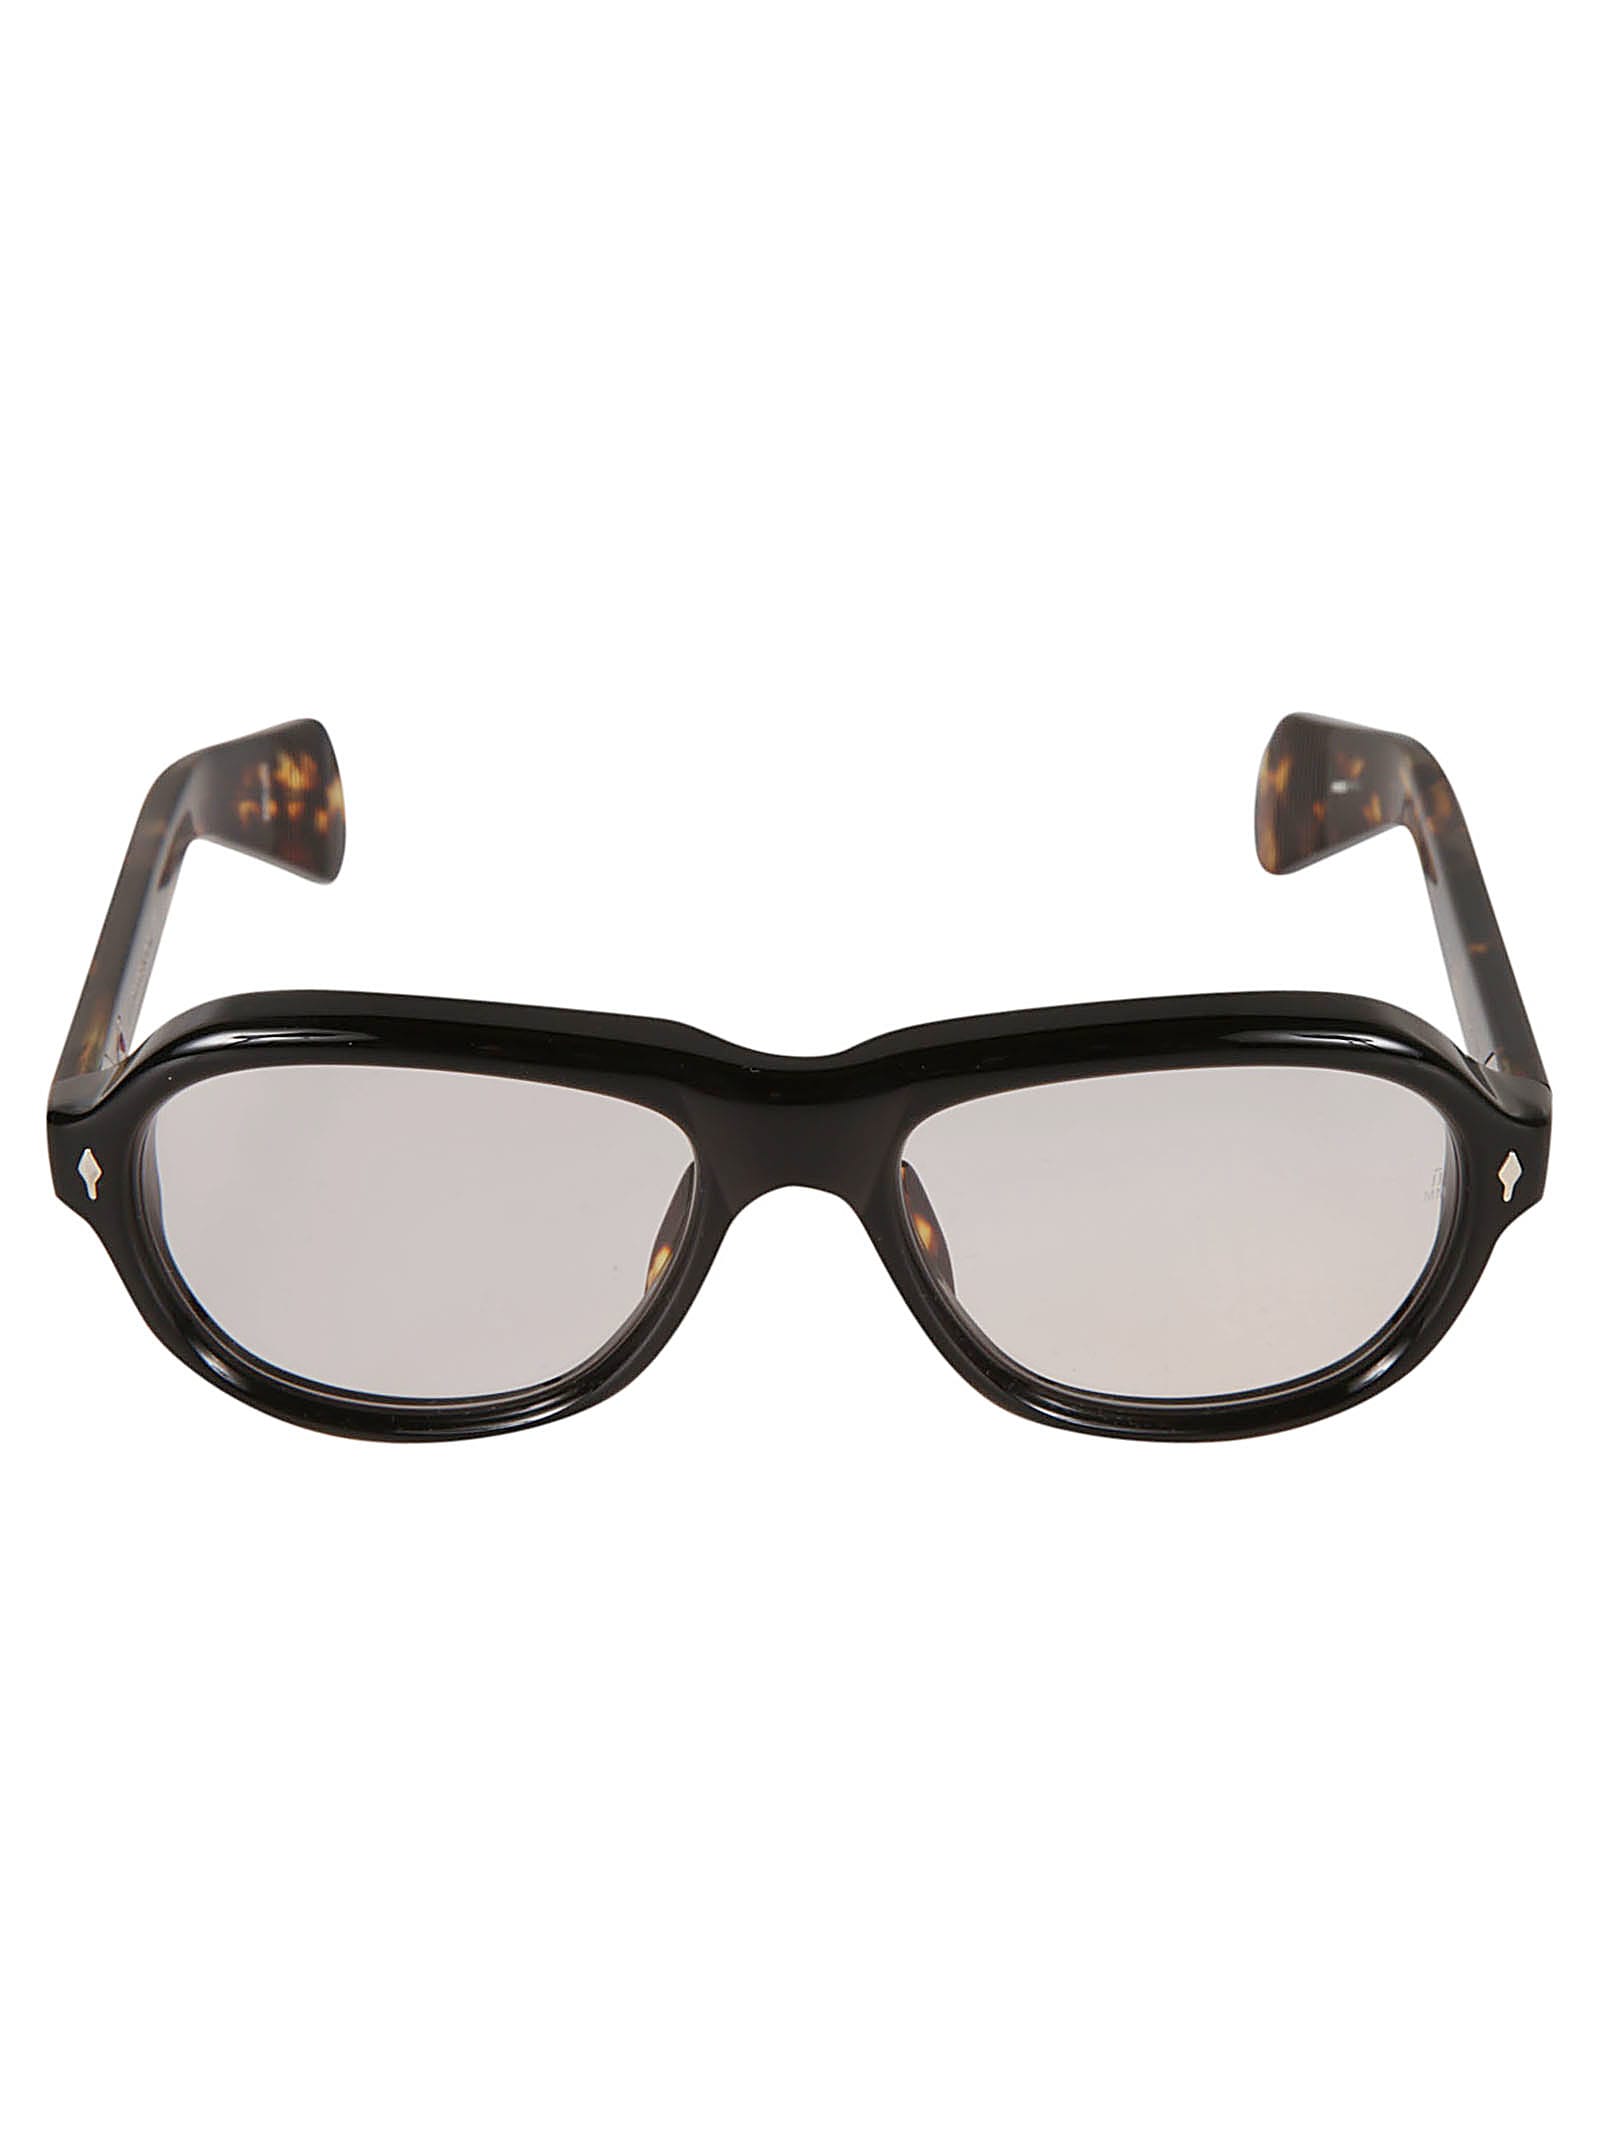 Jacques Marie Mage Richard Frame In Black